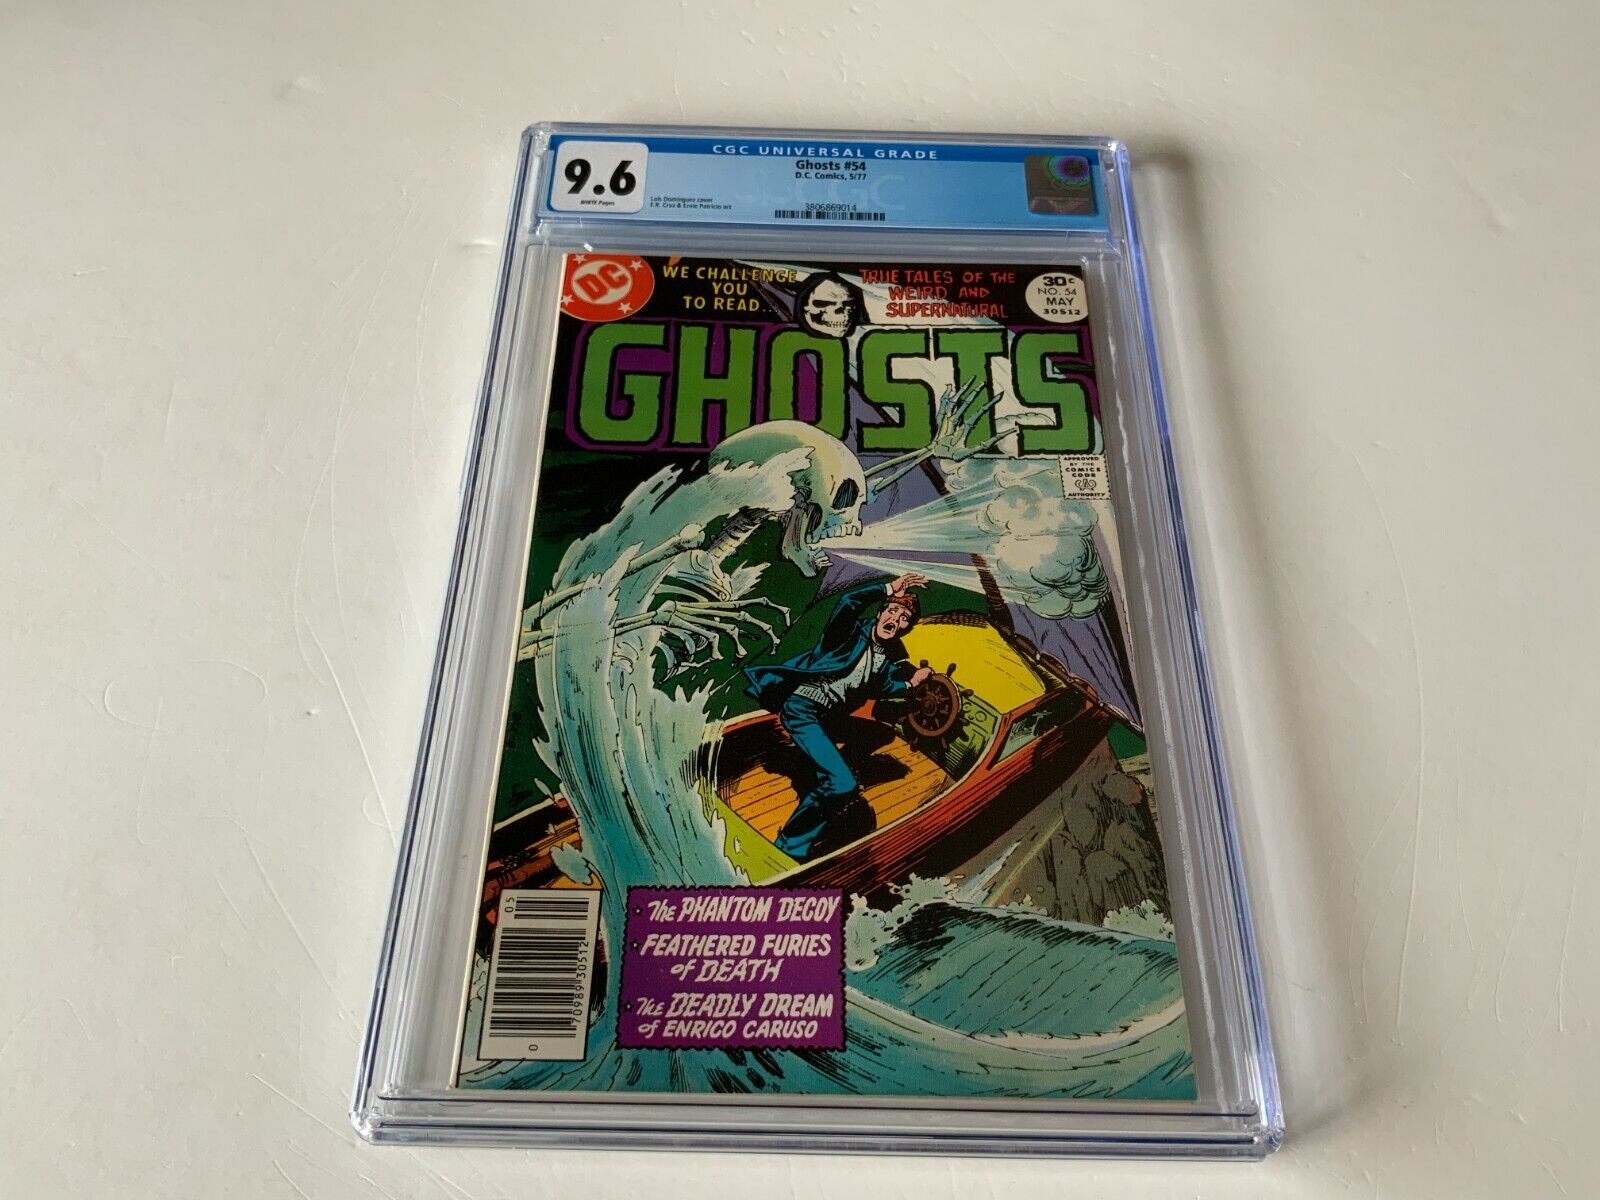 GHOSTS 54 CGC 9.6 WHITE PAGES SKELETON BOAT OCEAN ENRICO CARUSO DC COMICS 1977